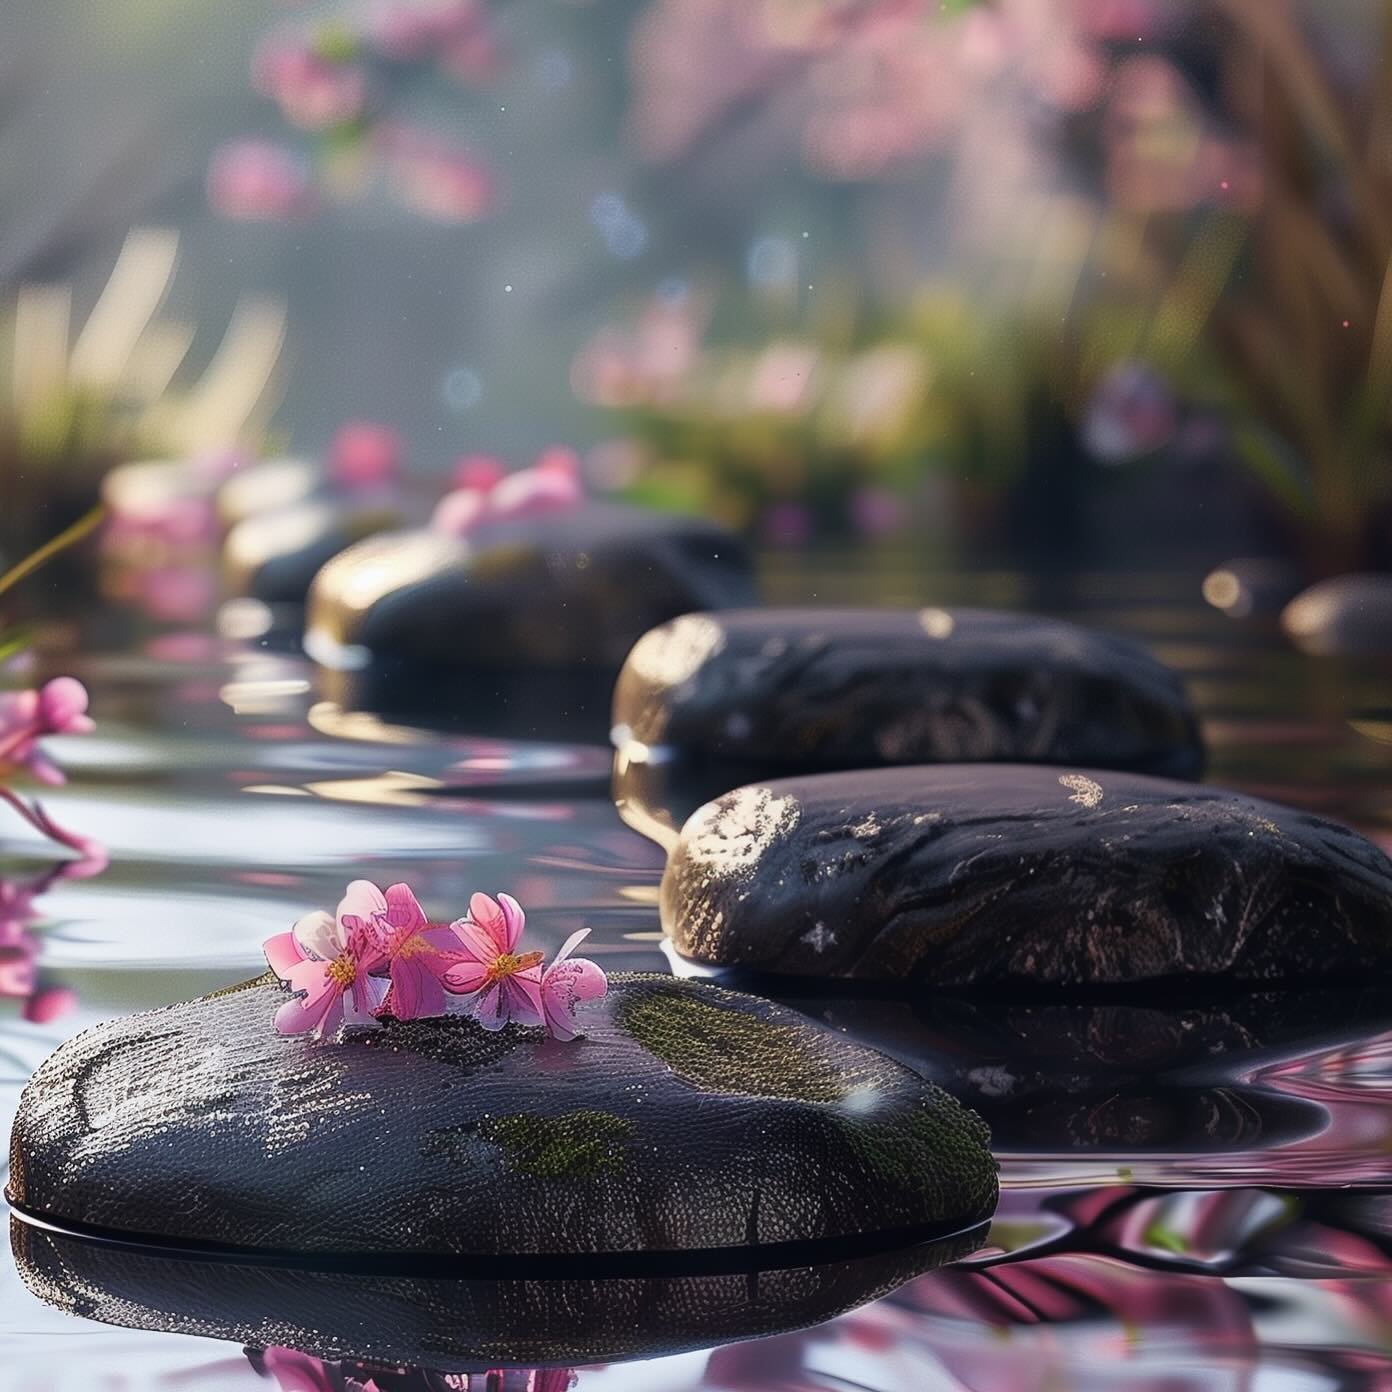 The morning sun not only brings light but also the essential warmth that nurtures all life. At Body Logic, we harness this warmth with our therapeutic hot stone massages. These stones improve circulation and melt away tension, priming you for a day f